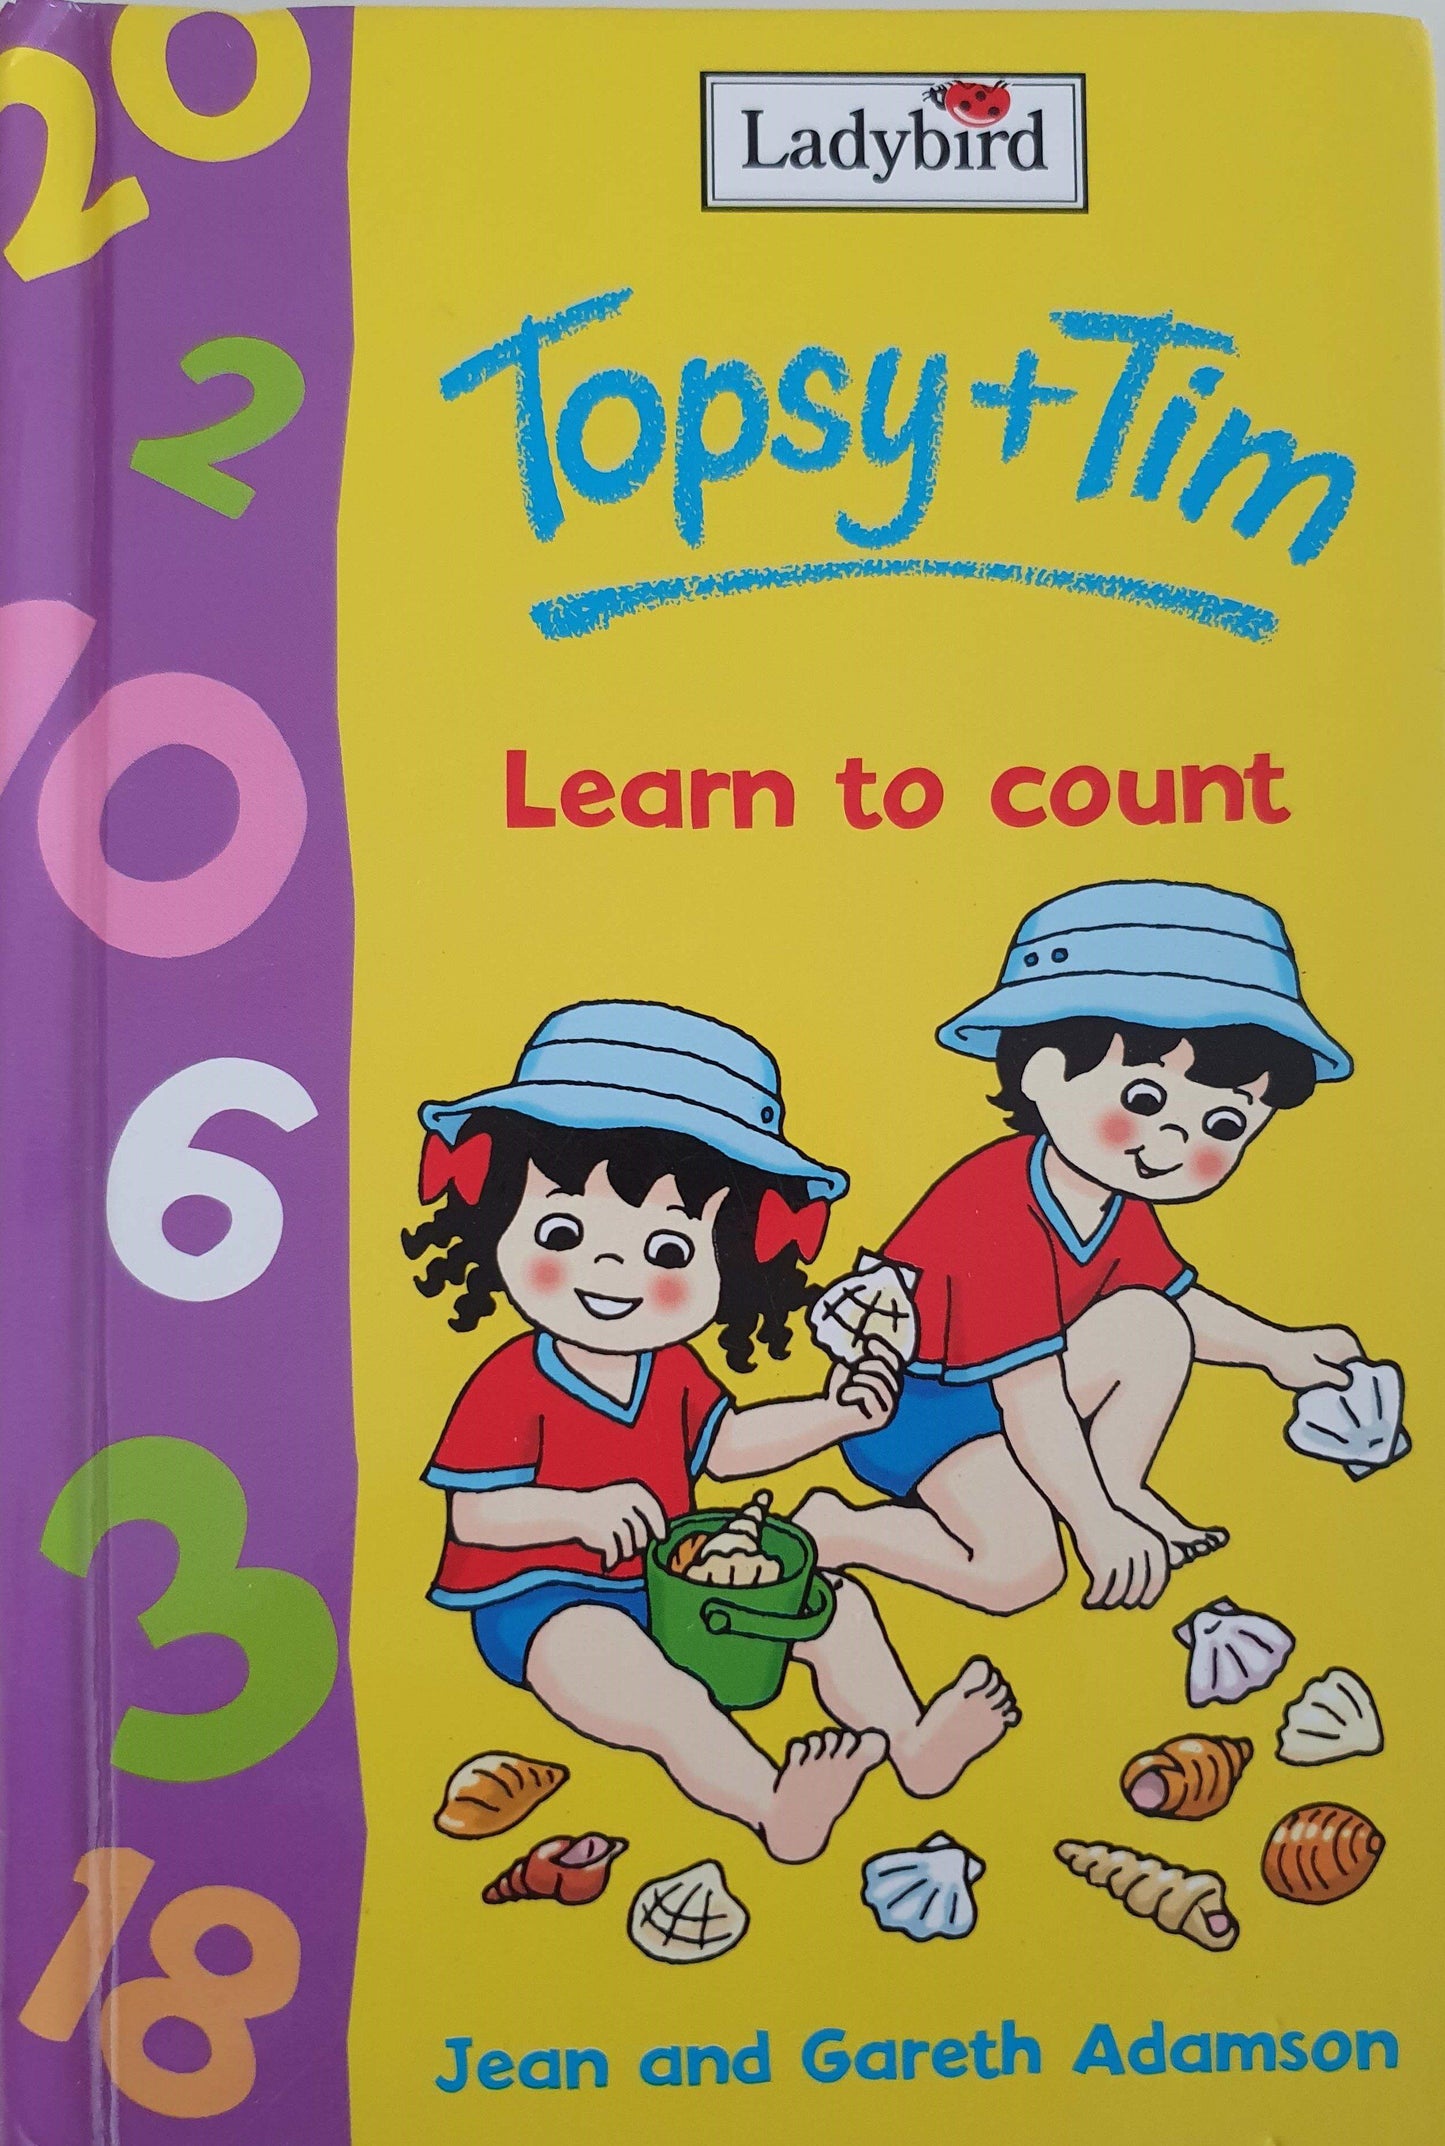 Topsy+Tim Learning count Like New Ladybird  (6059217289401)